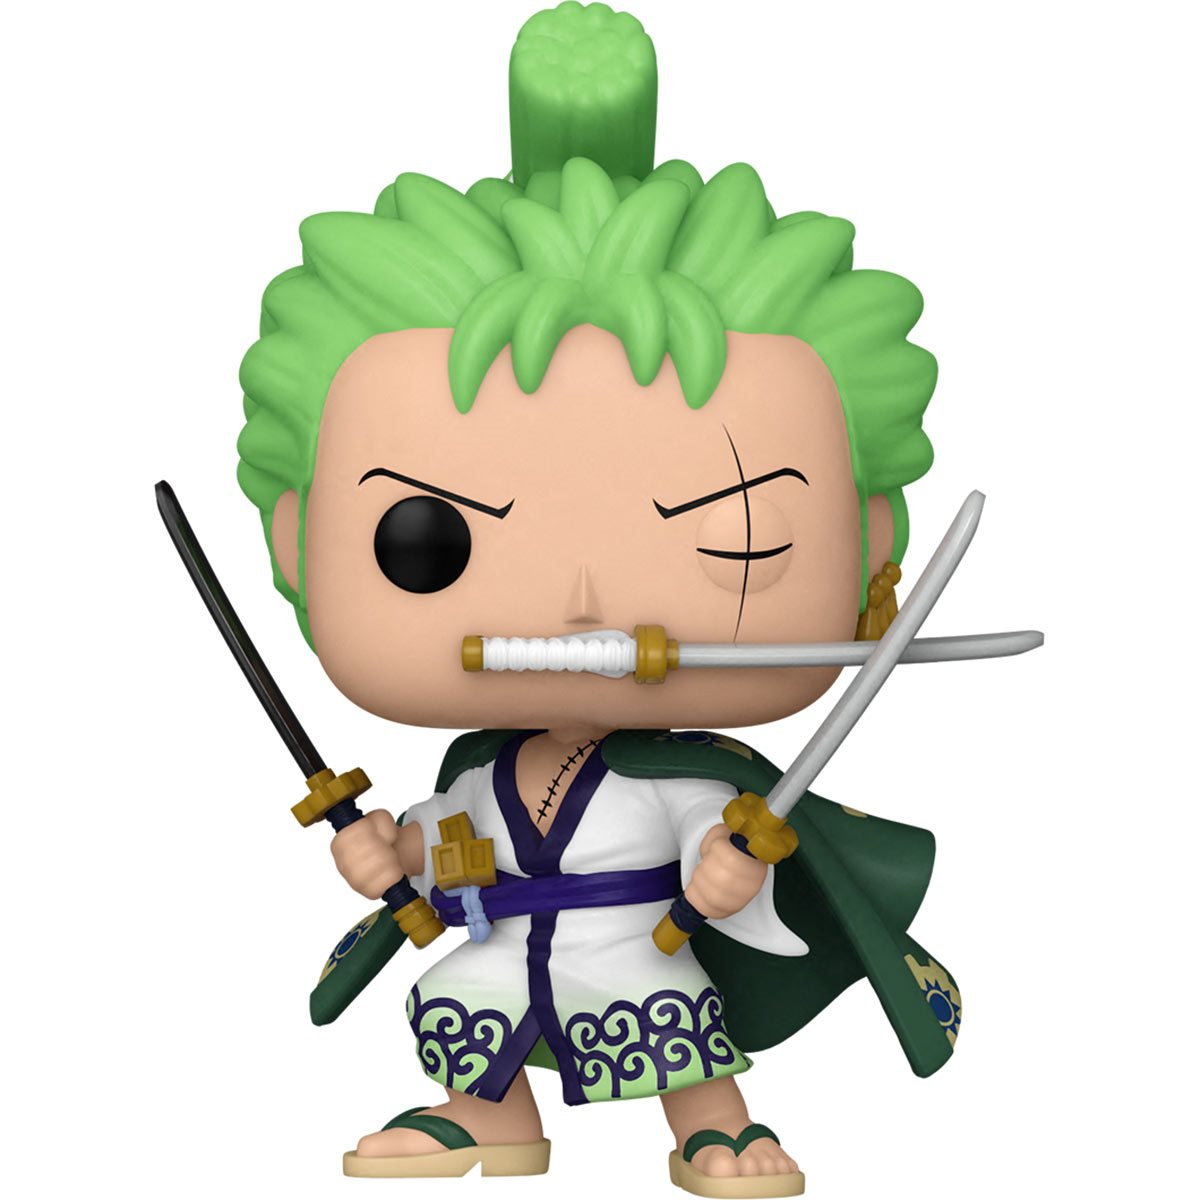 Ronoroa Zoro PNG Images, Ronoroa Zoro Clipart Free Download